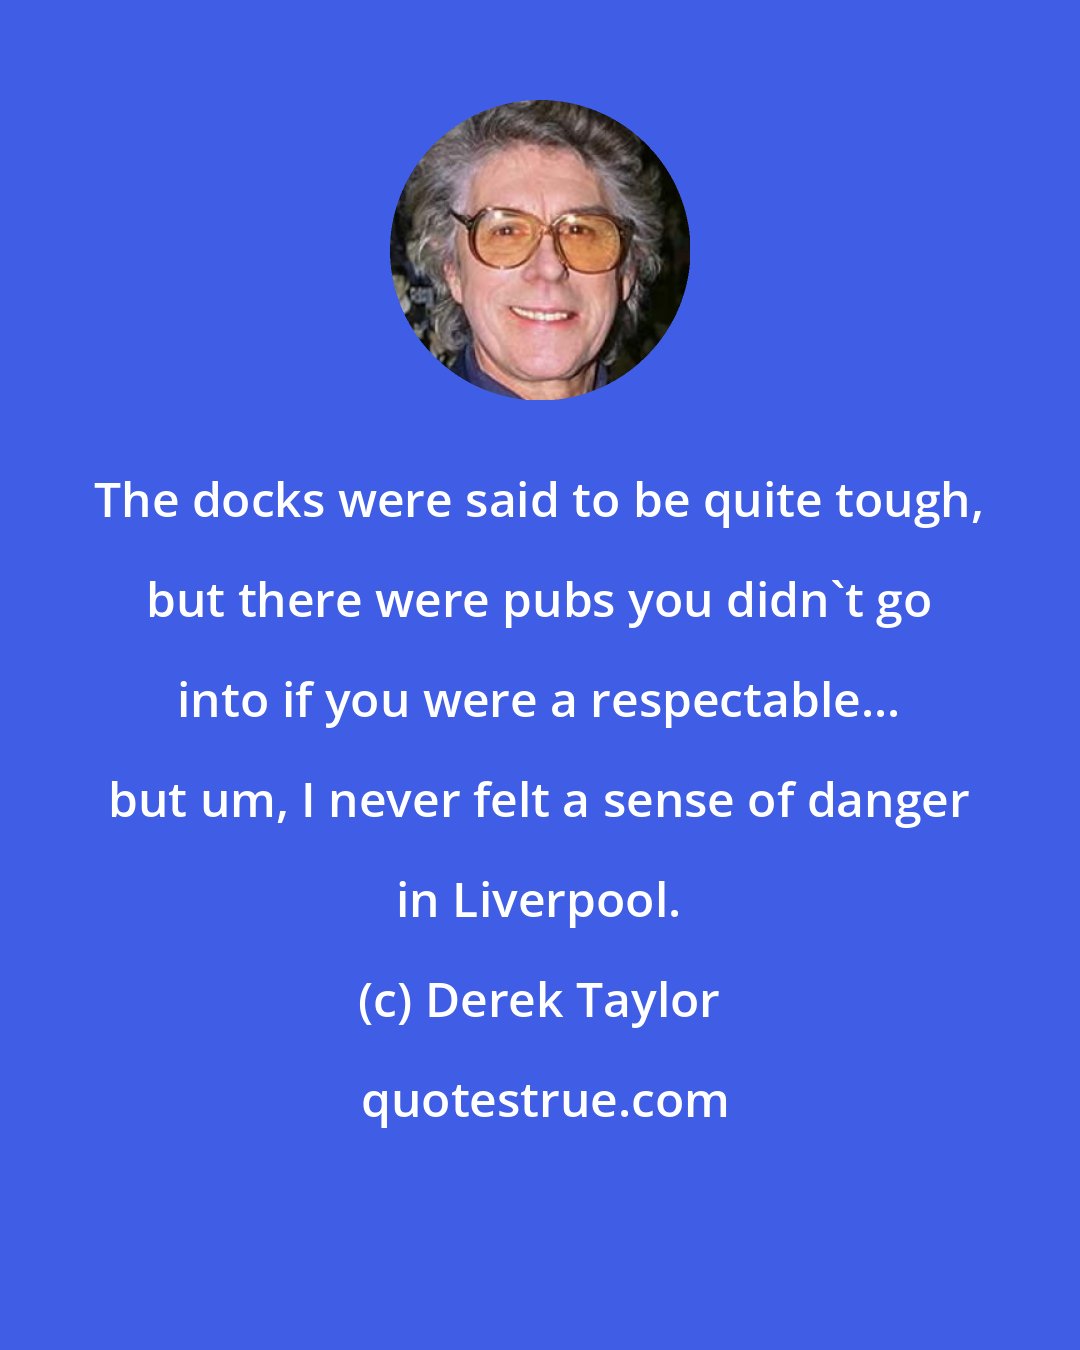 Derek Taylor: The docks were said to be quite tough, but there were pubs you didn't go into if you were a respectable... but um, I never felt a sense of danger in Liverpool.